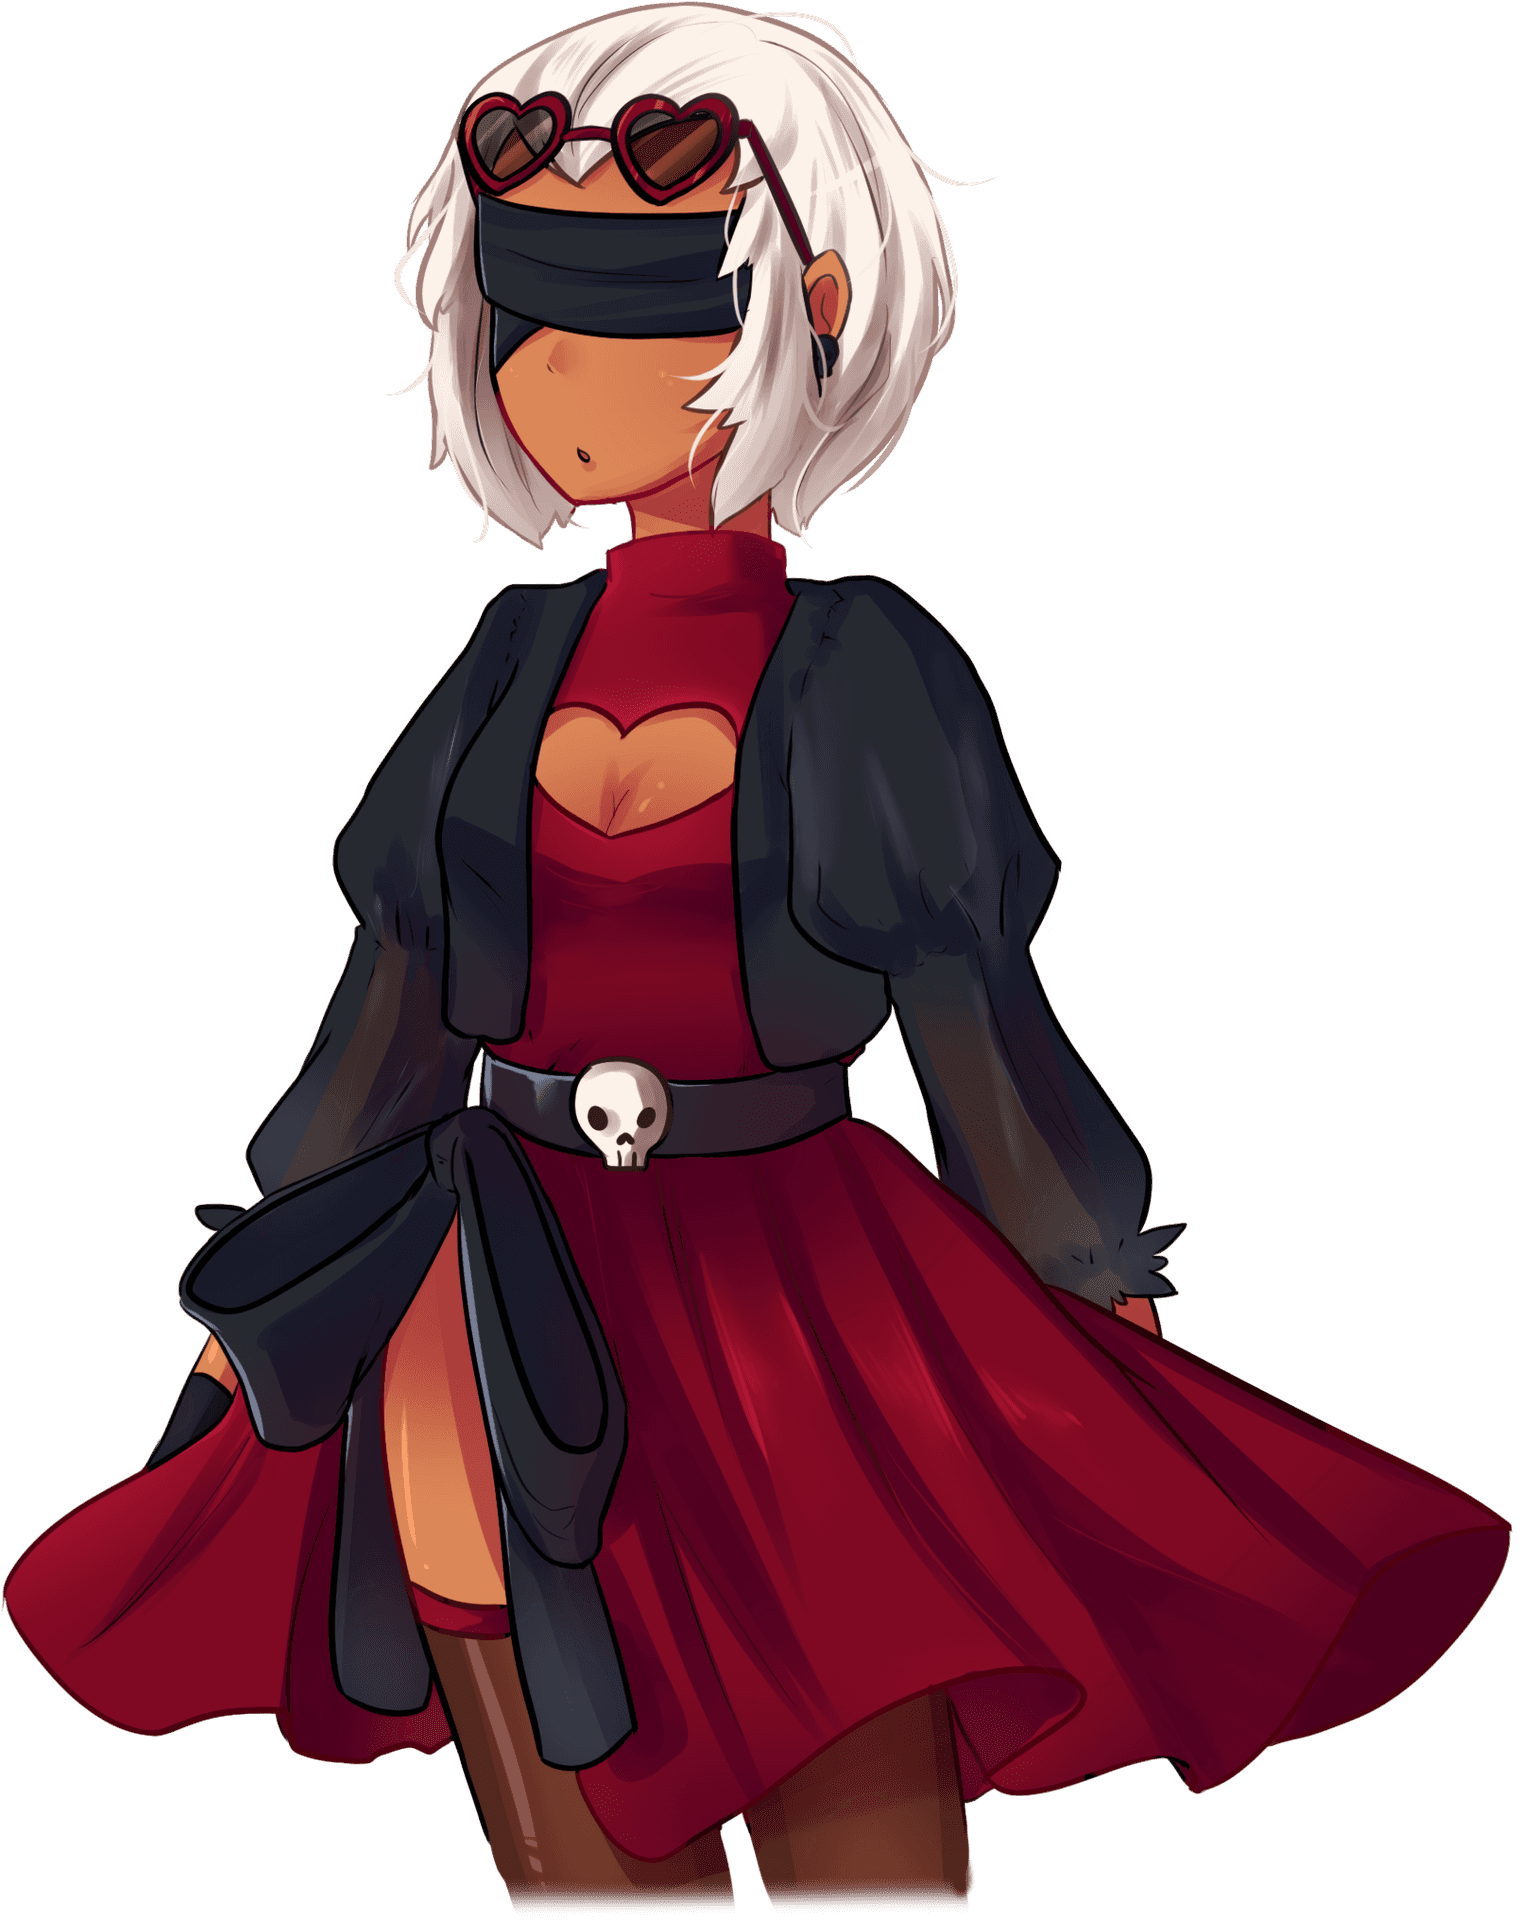 Stylish Anime Girlin Redand Black Outfit PNG image